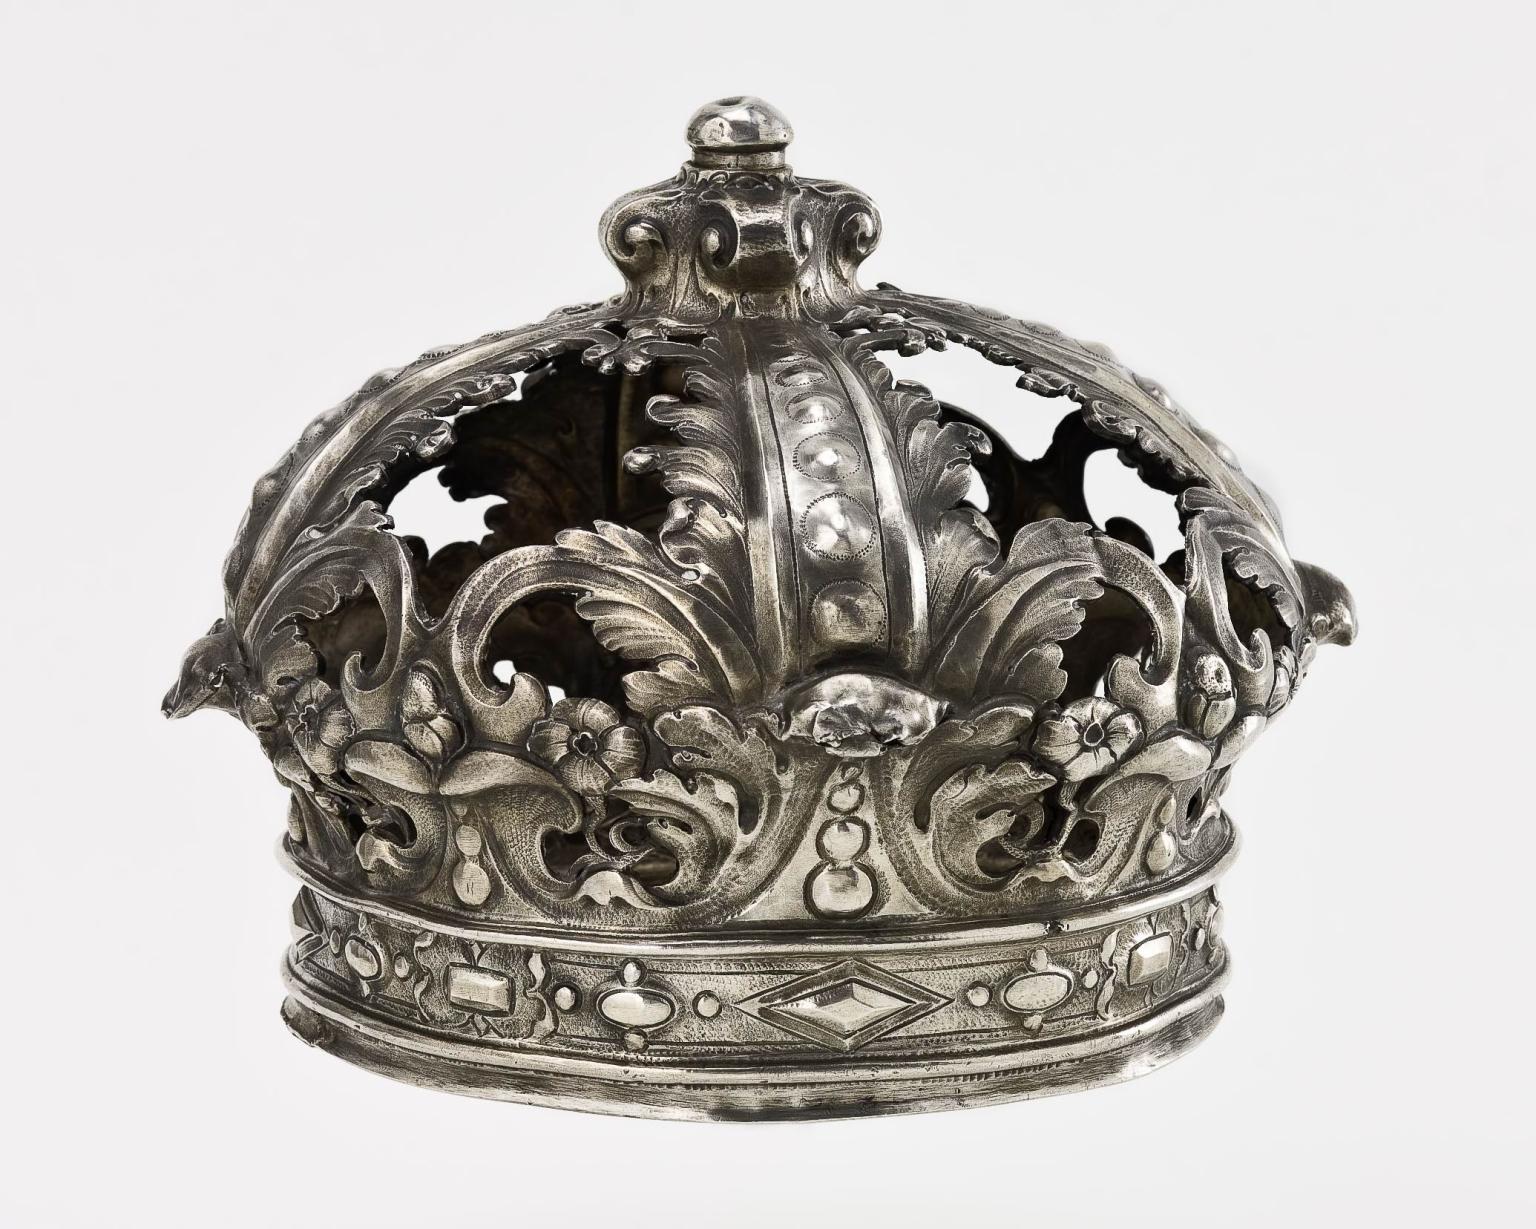 Crown with punched and engraved leaves, vines, and jewels. 